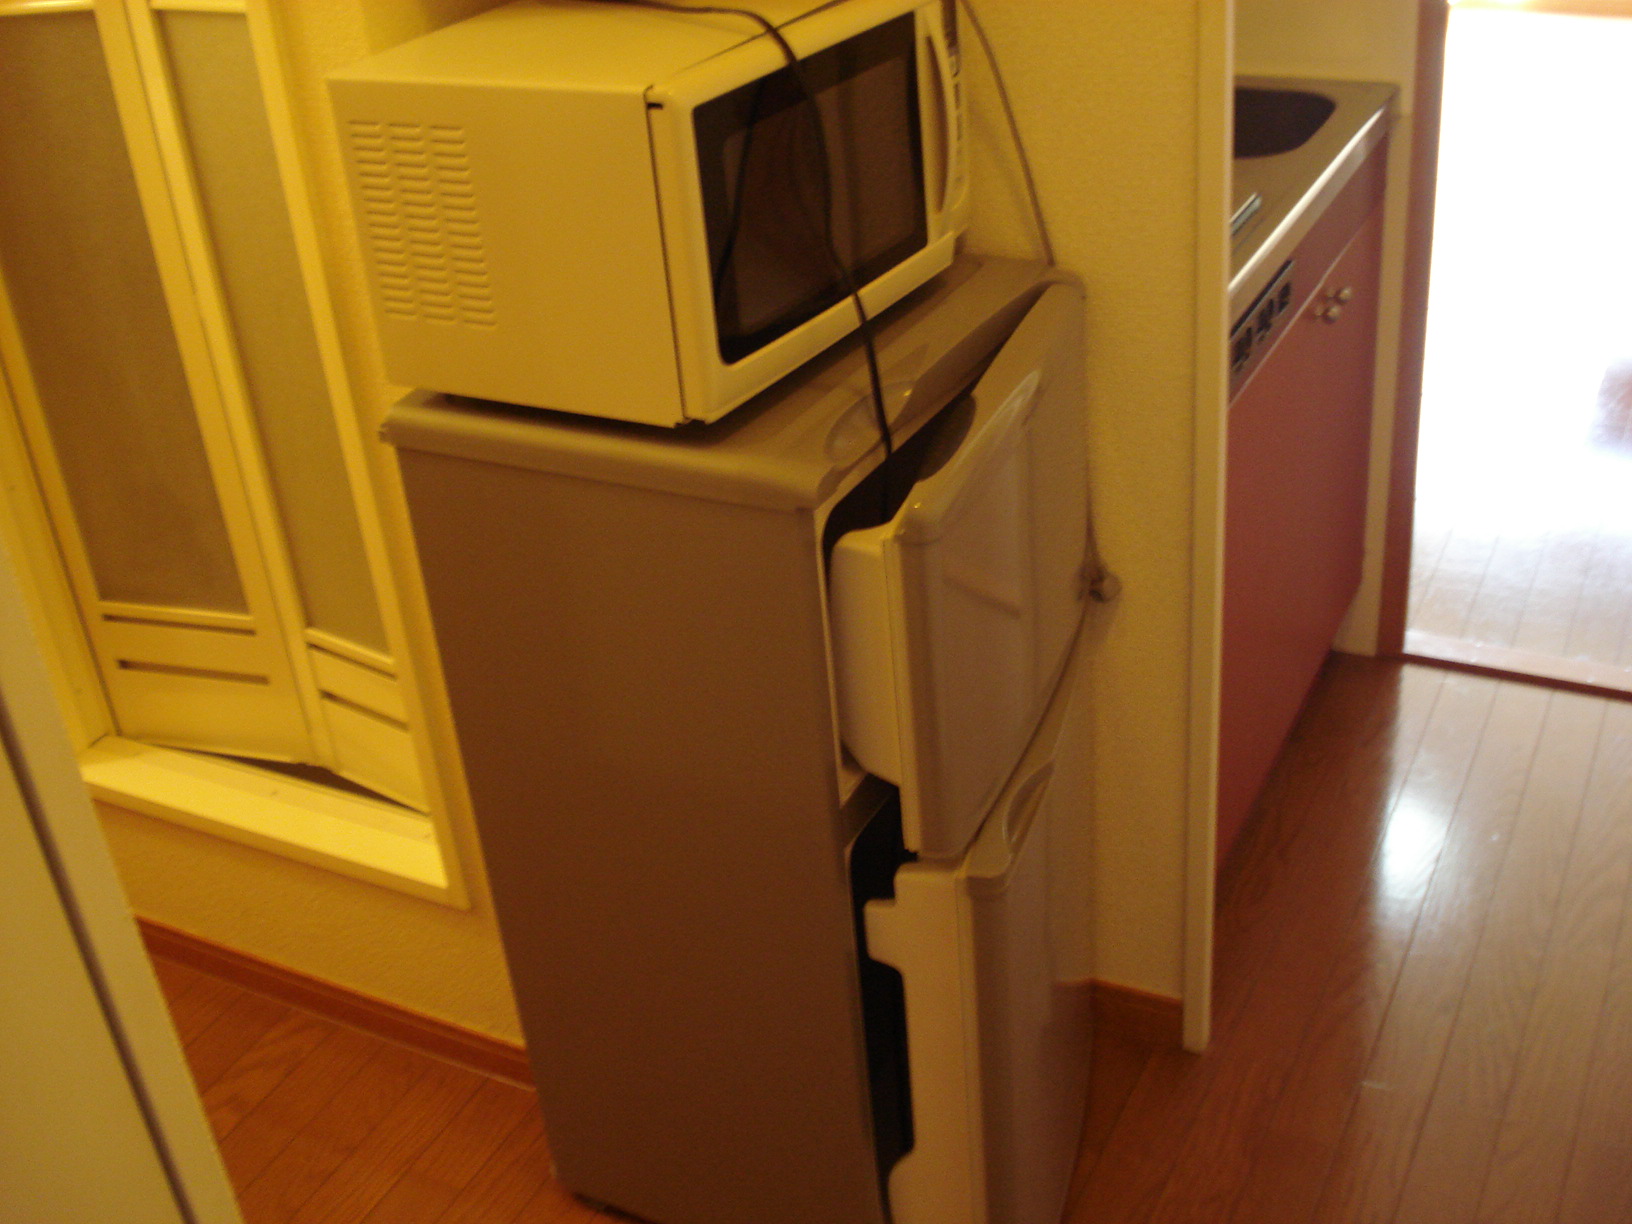 Other Equipment. microwave, refrigerator